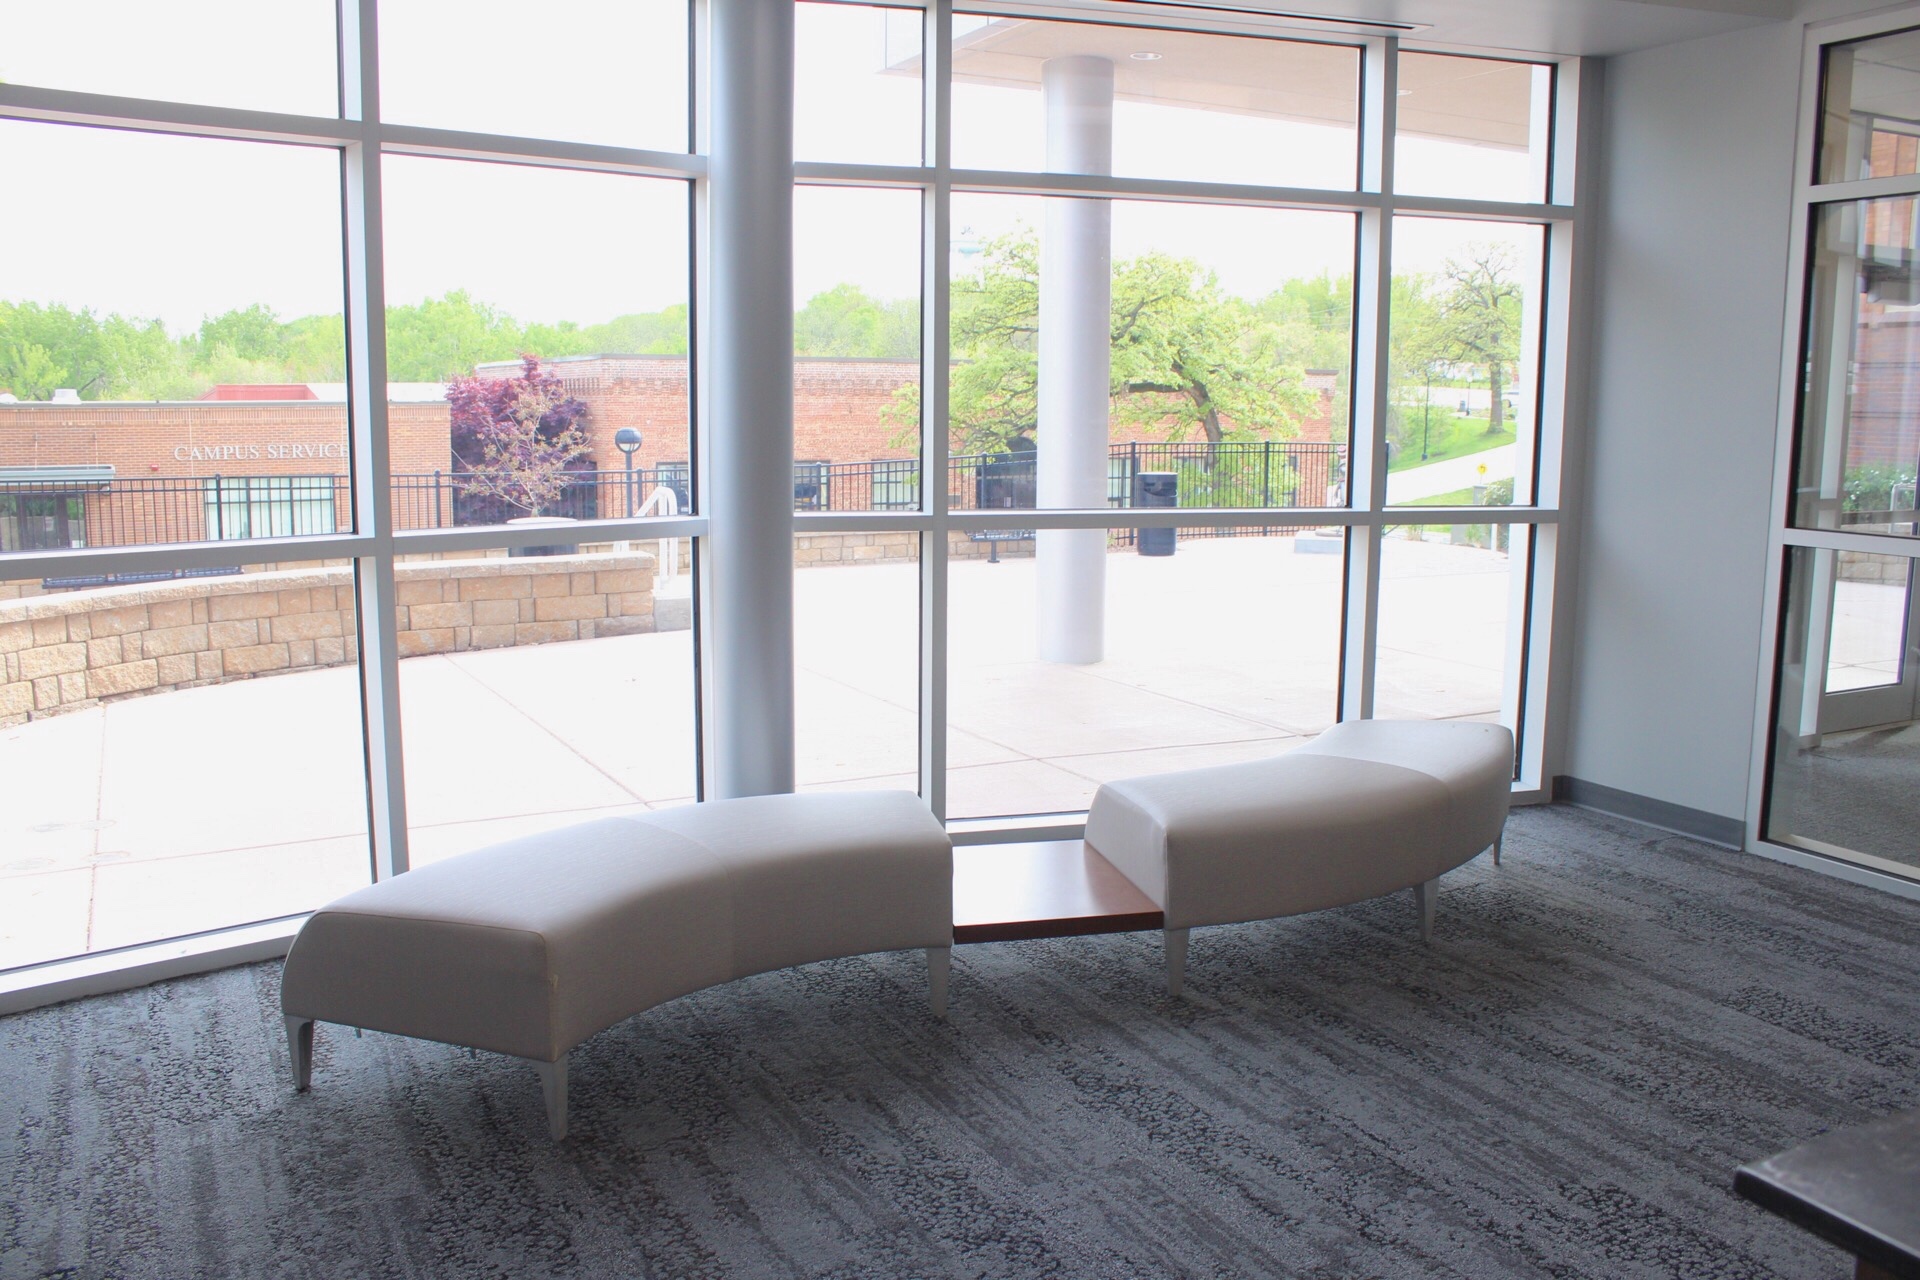 Seating area in the lobby of the Performing Arts Center.